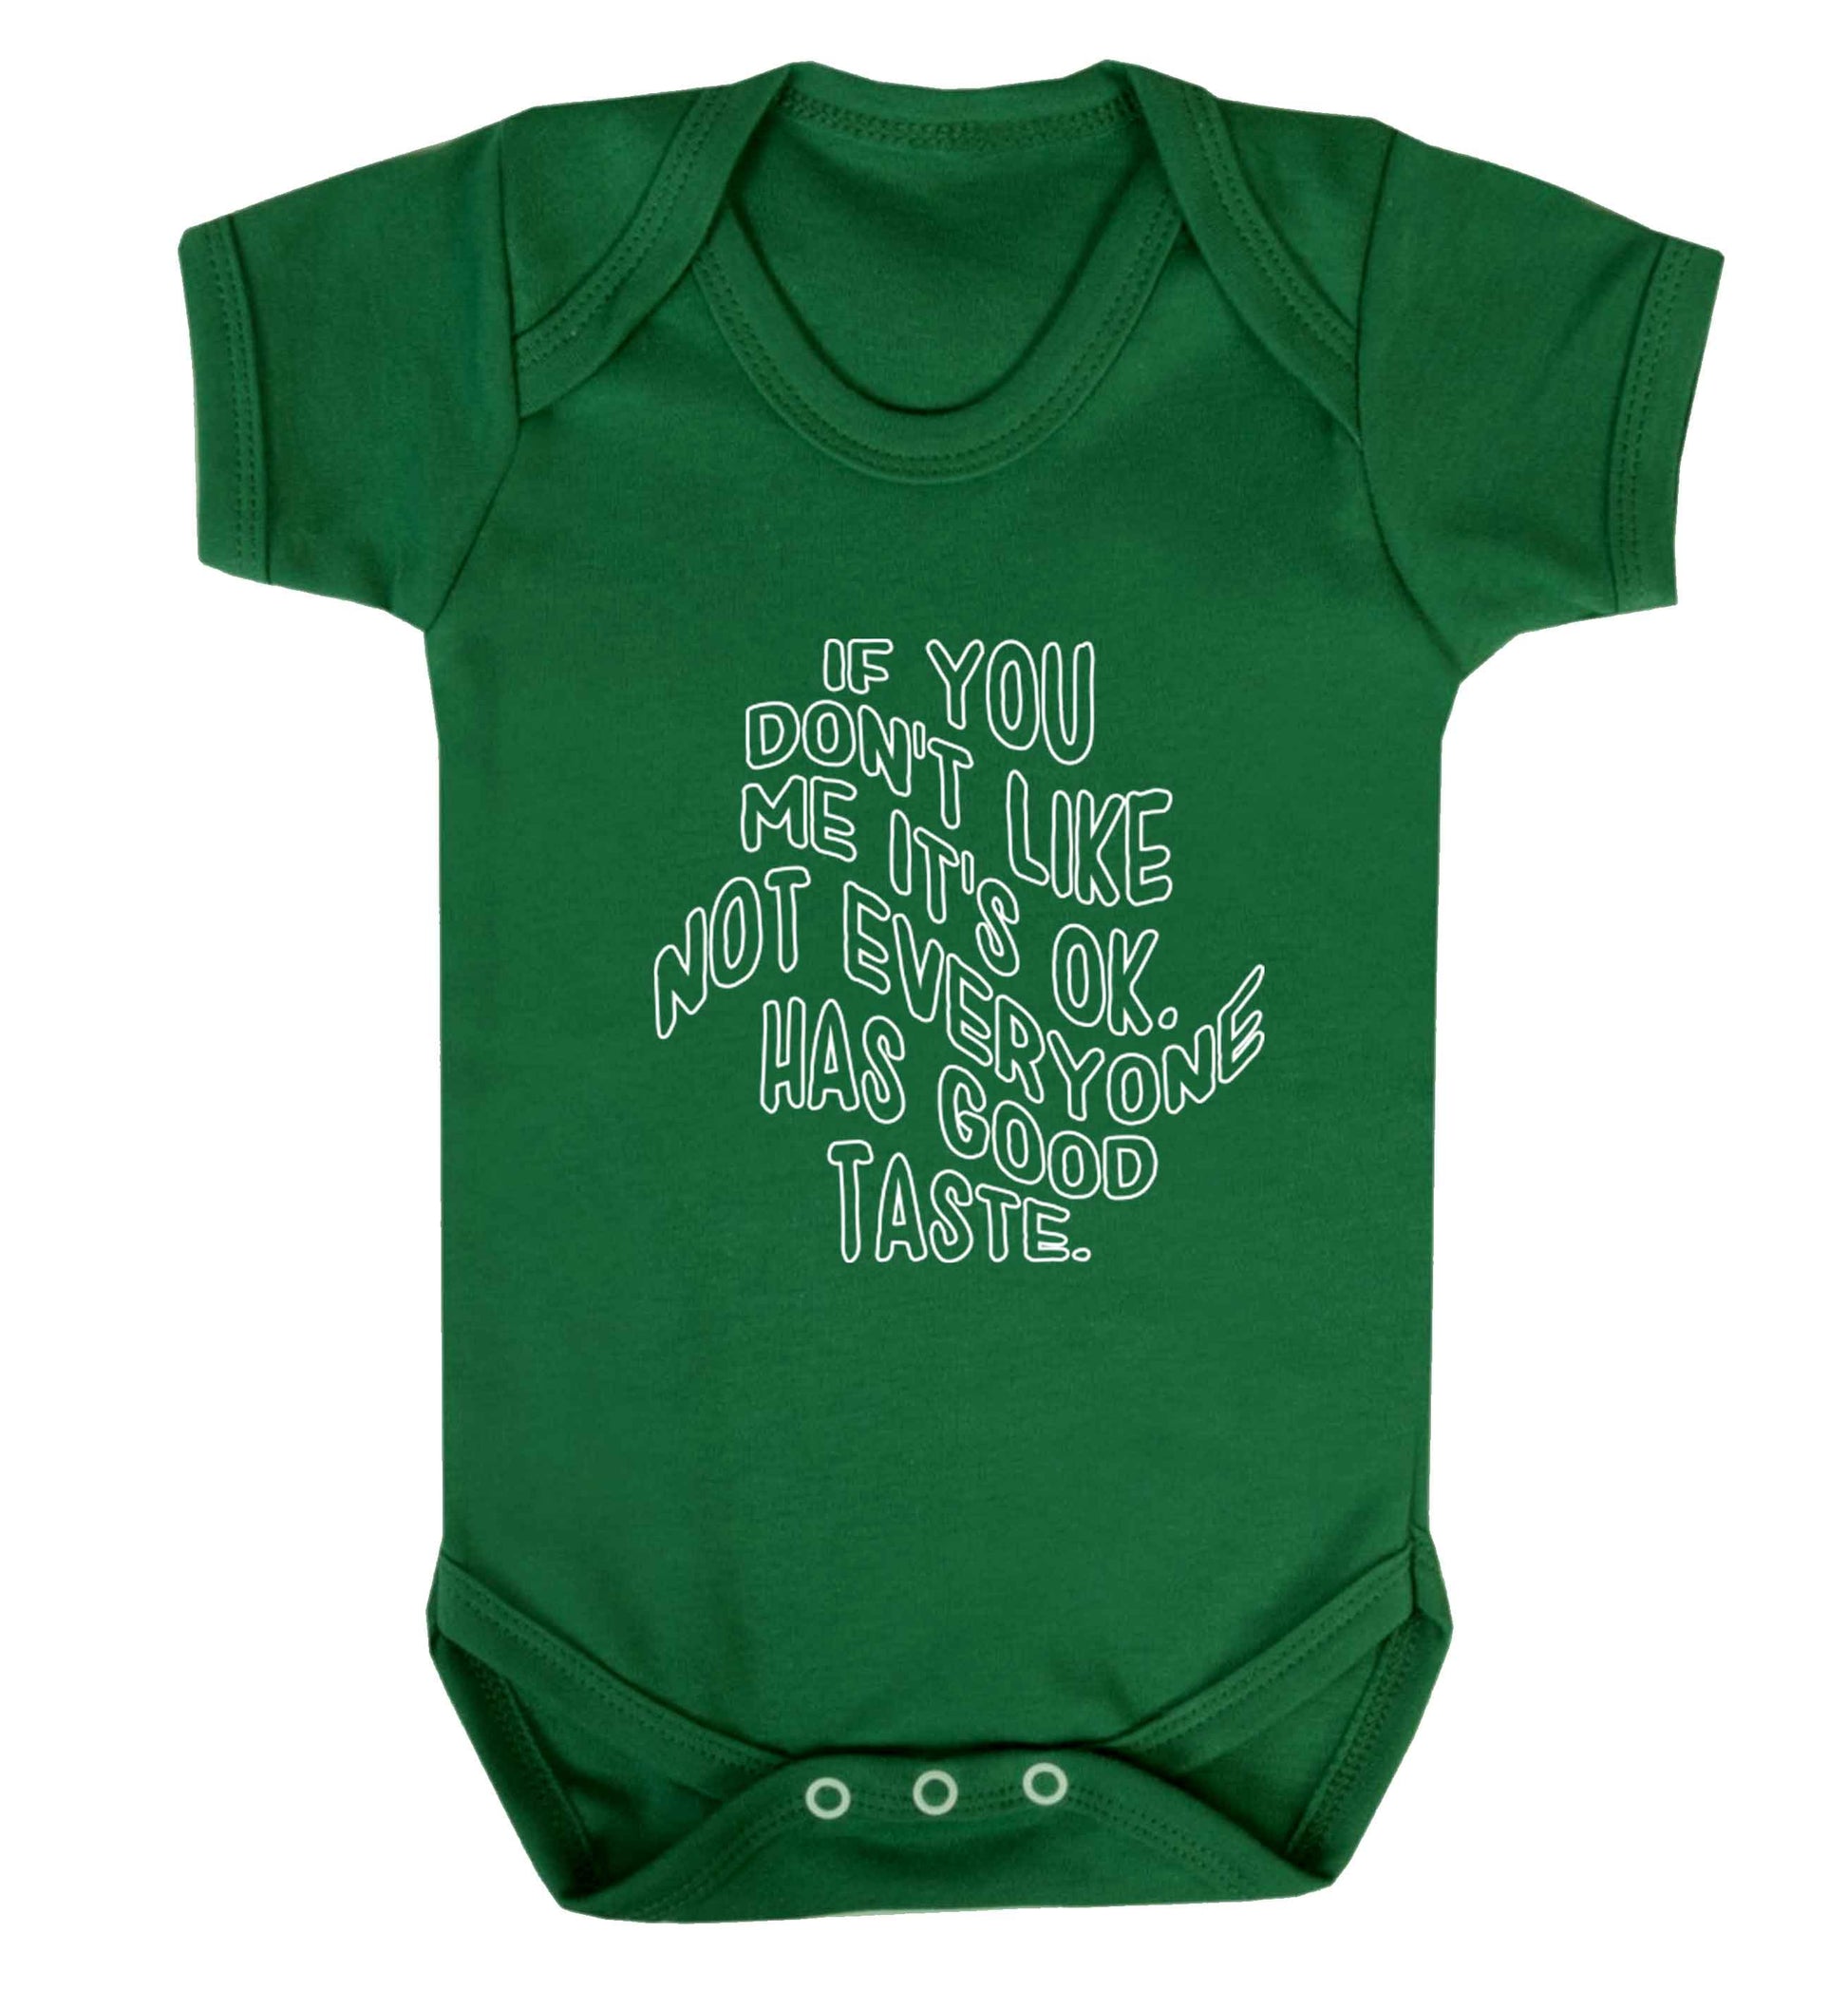 If you don't like me it's ok not everyone has good taste baby vest green 18-24 months